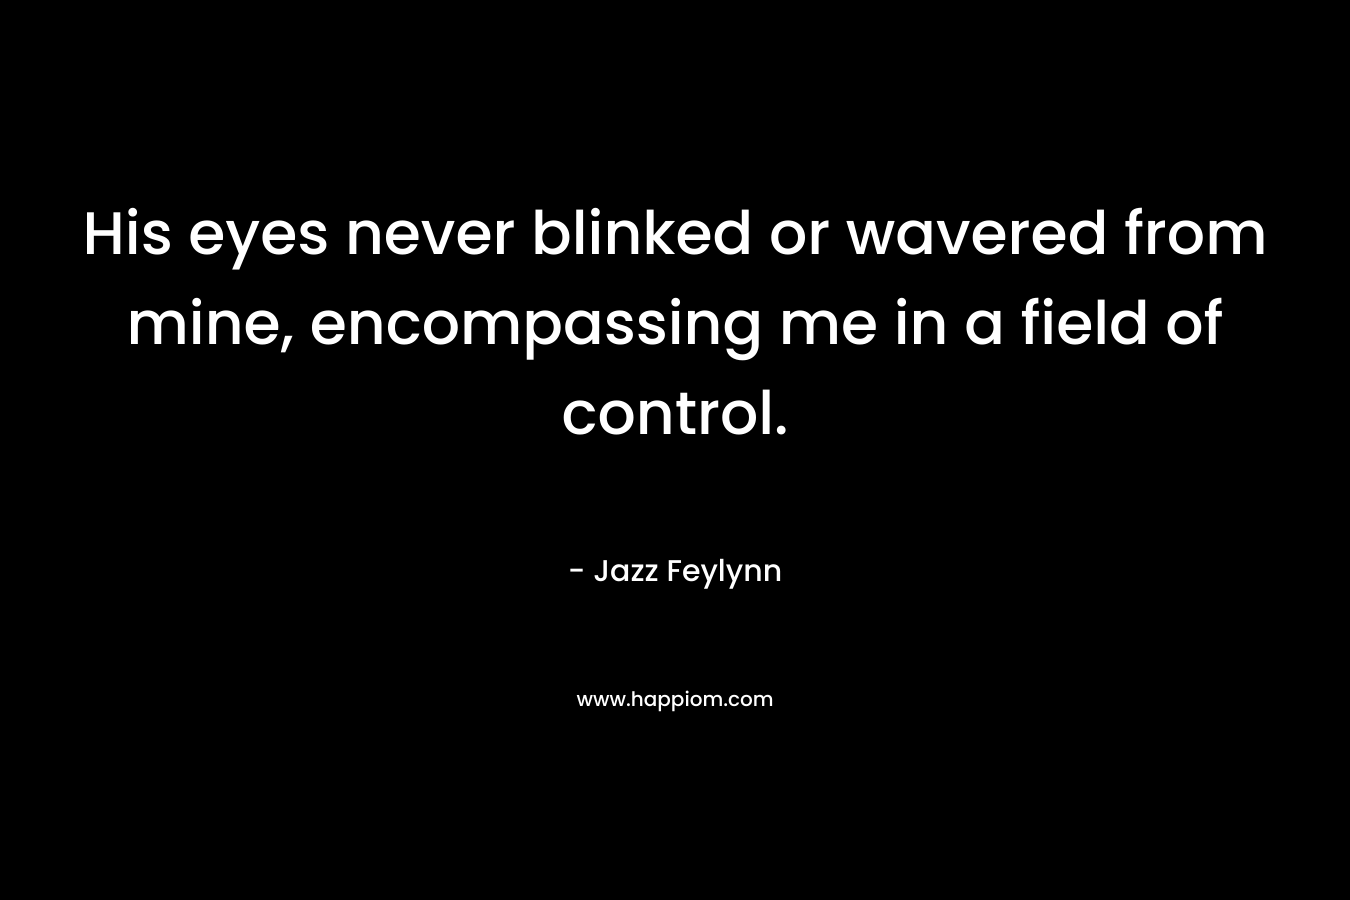 His eyes never blinked or wavered from mine, encompassing me in a field of control. – Jazz Feylynn